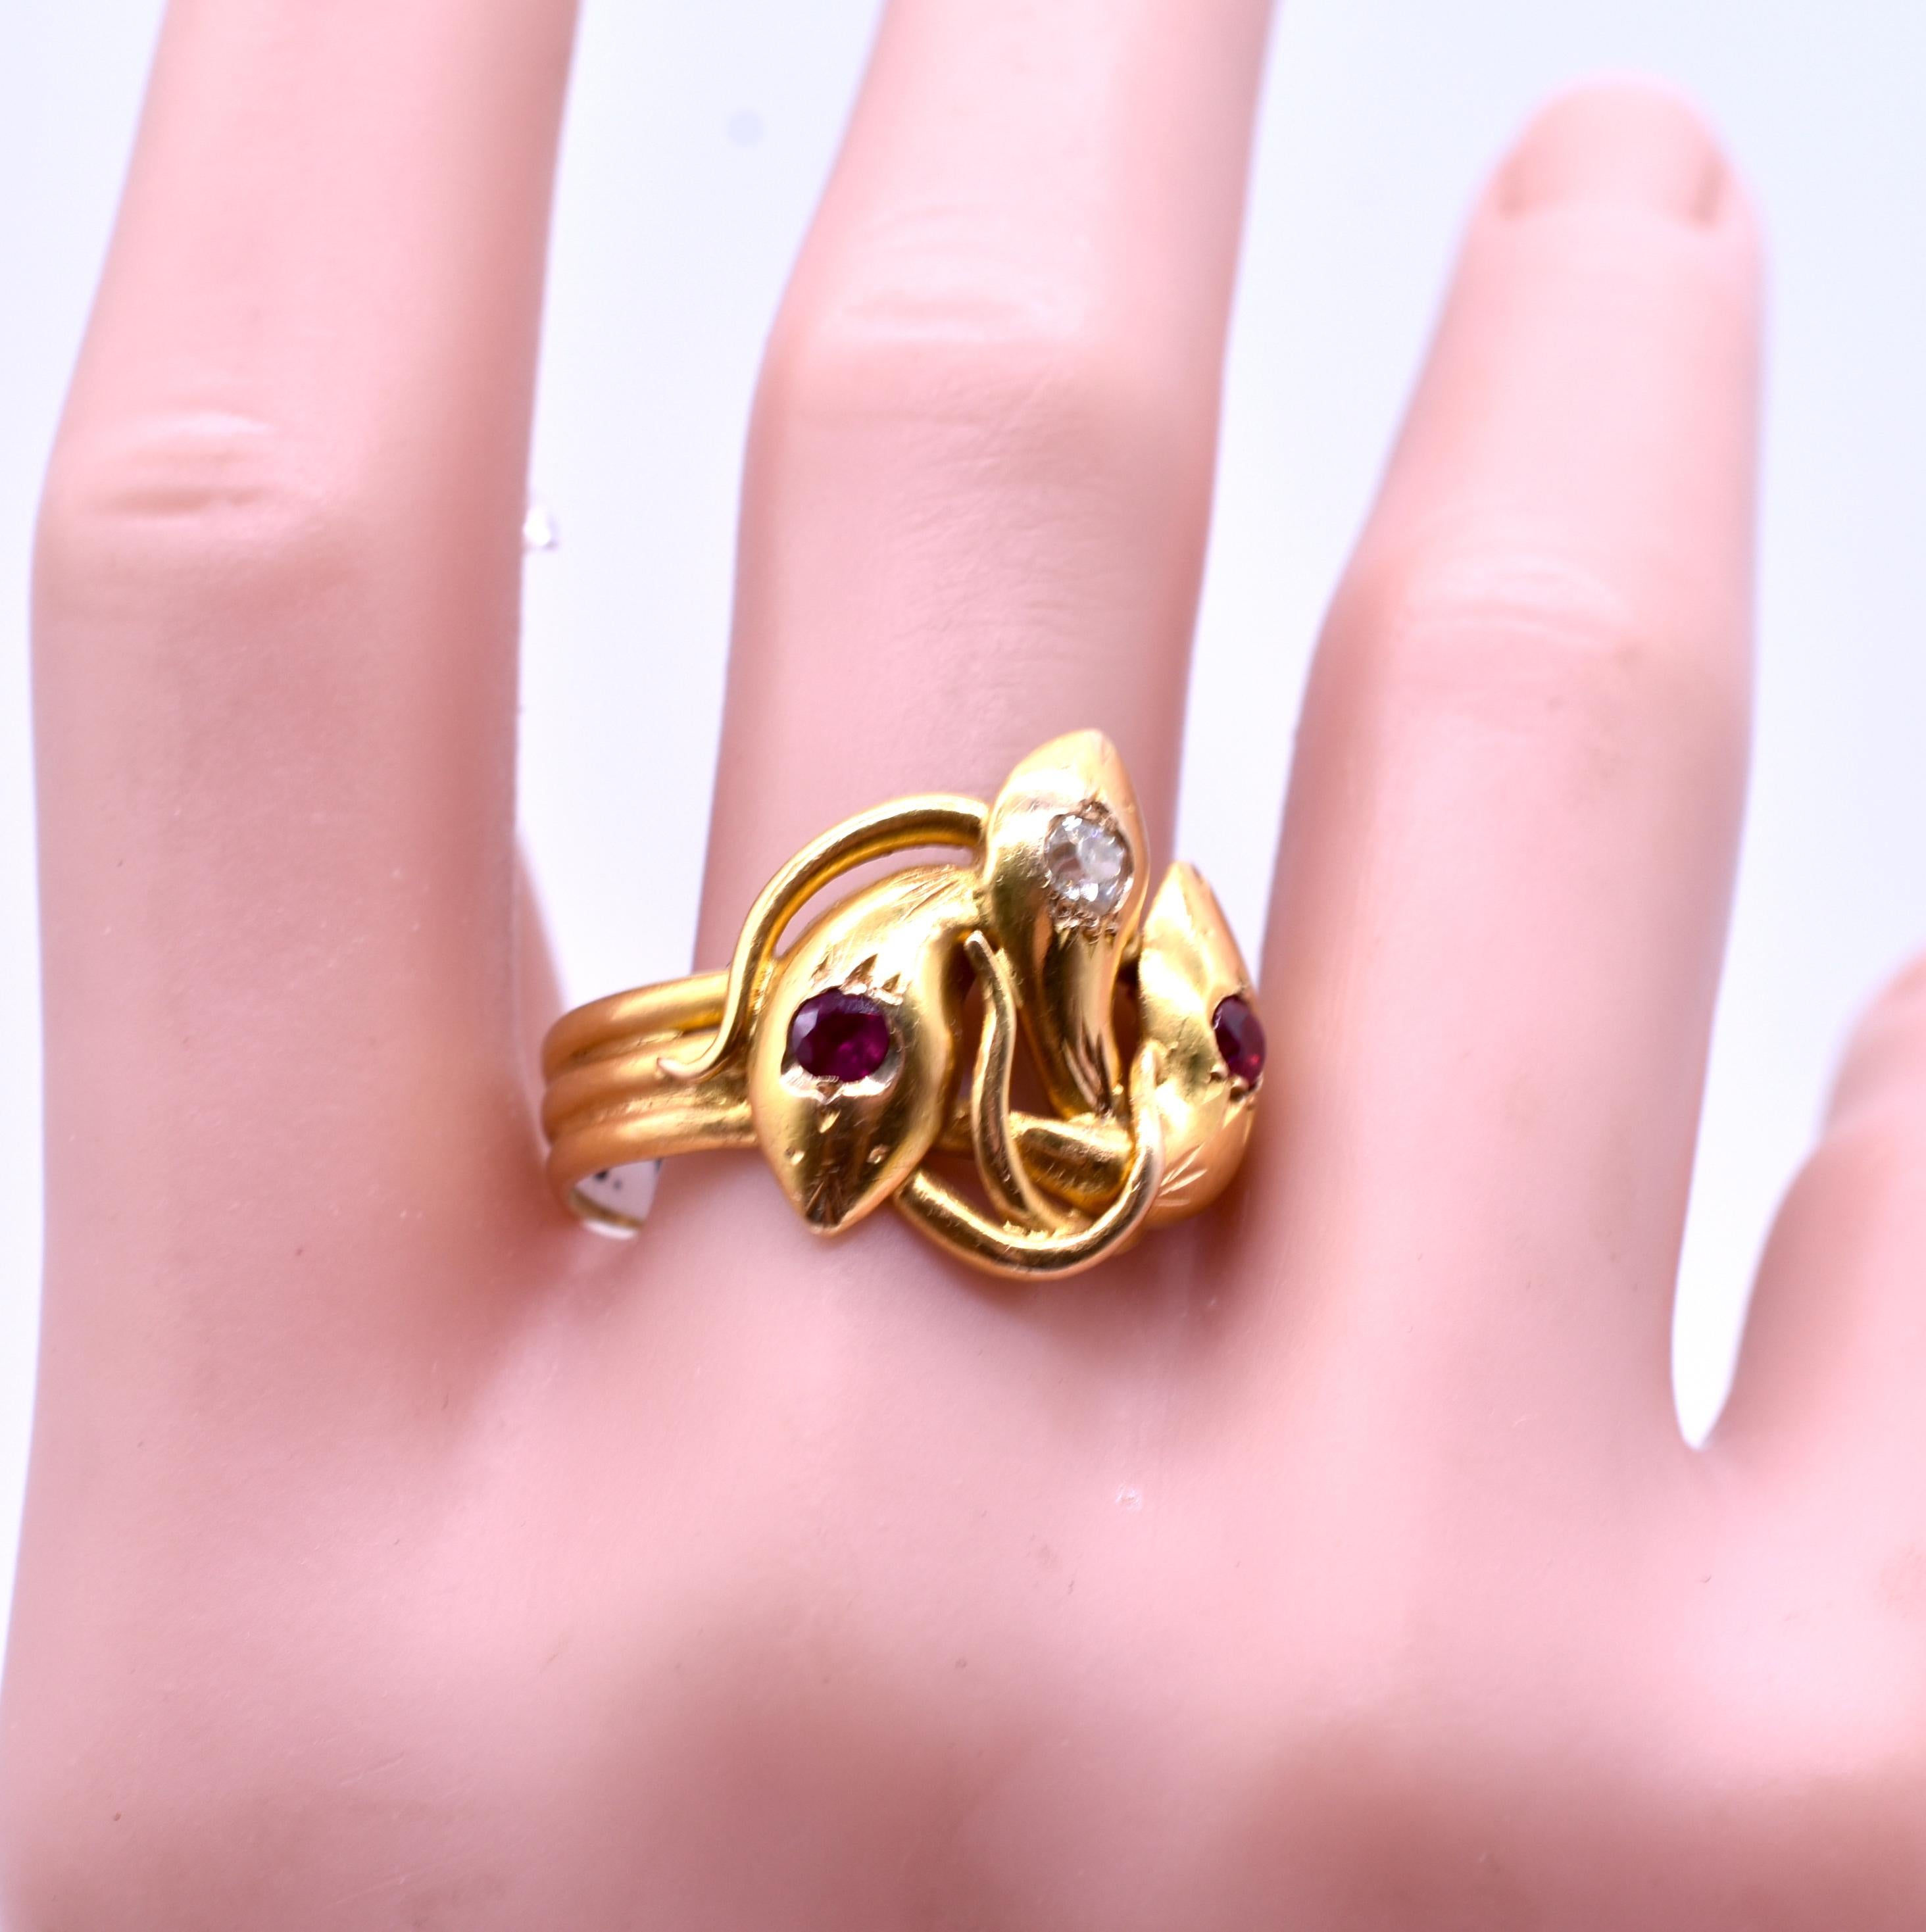 Late Victorian Three Headed Snake Ring with Rubies and Diamonds